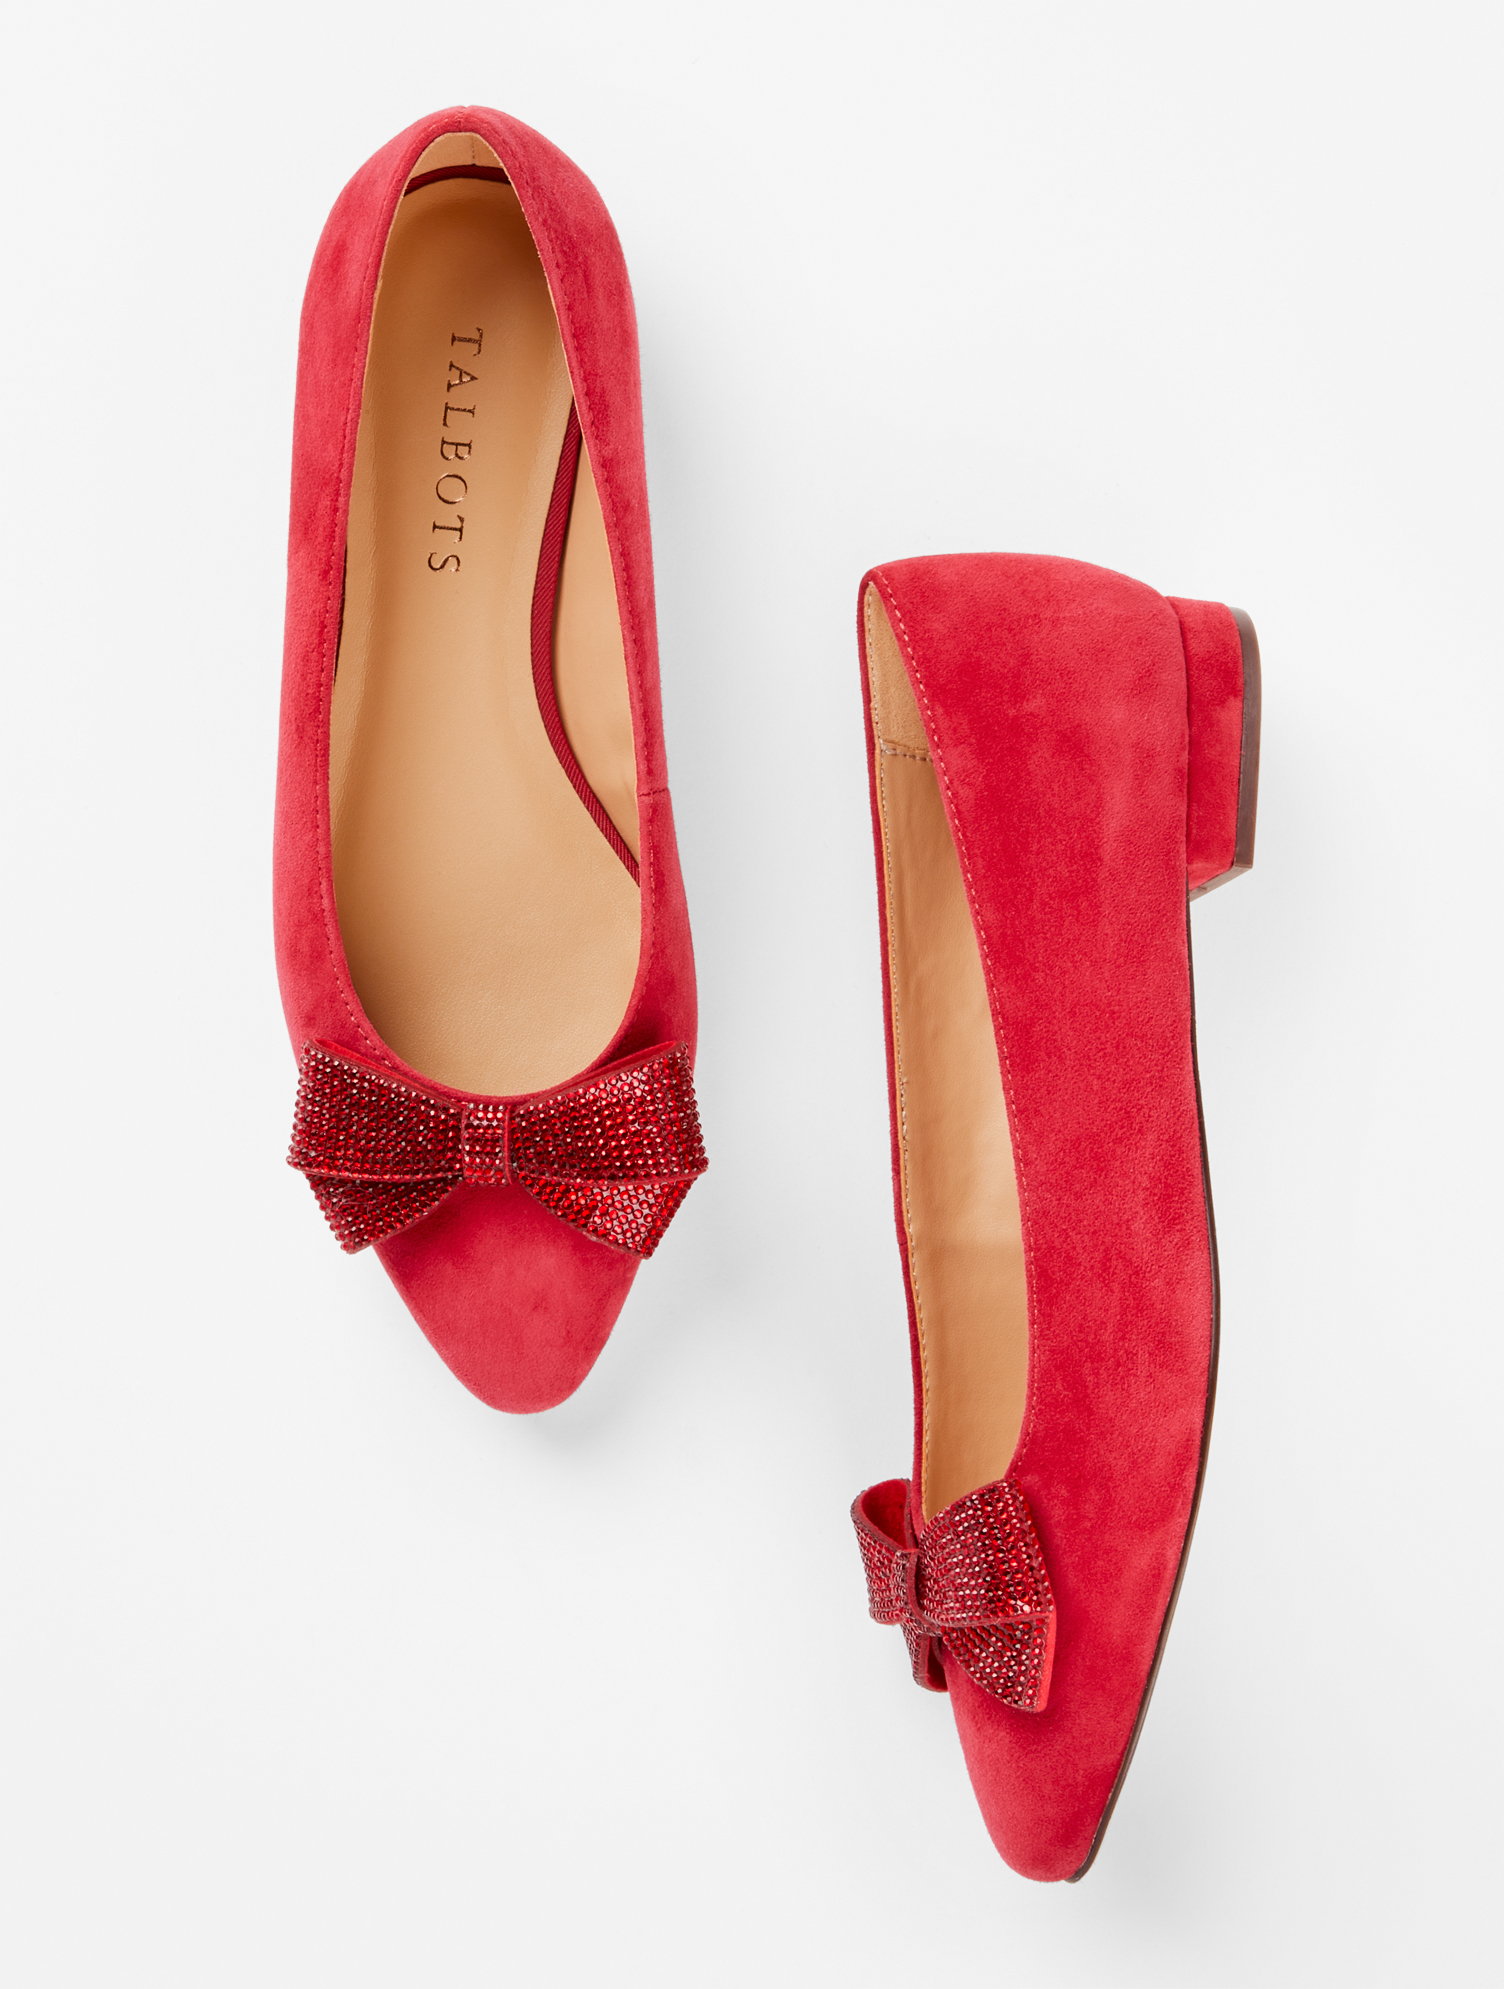 Talbots Edison Bow Suede Flats - Red - 8m